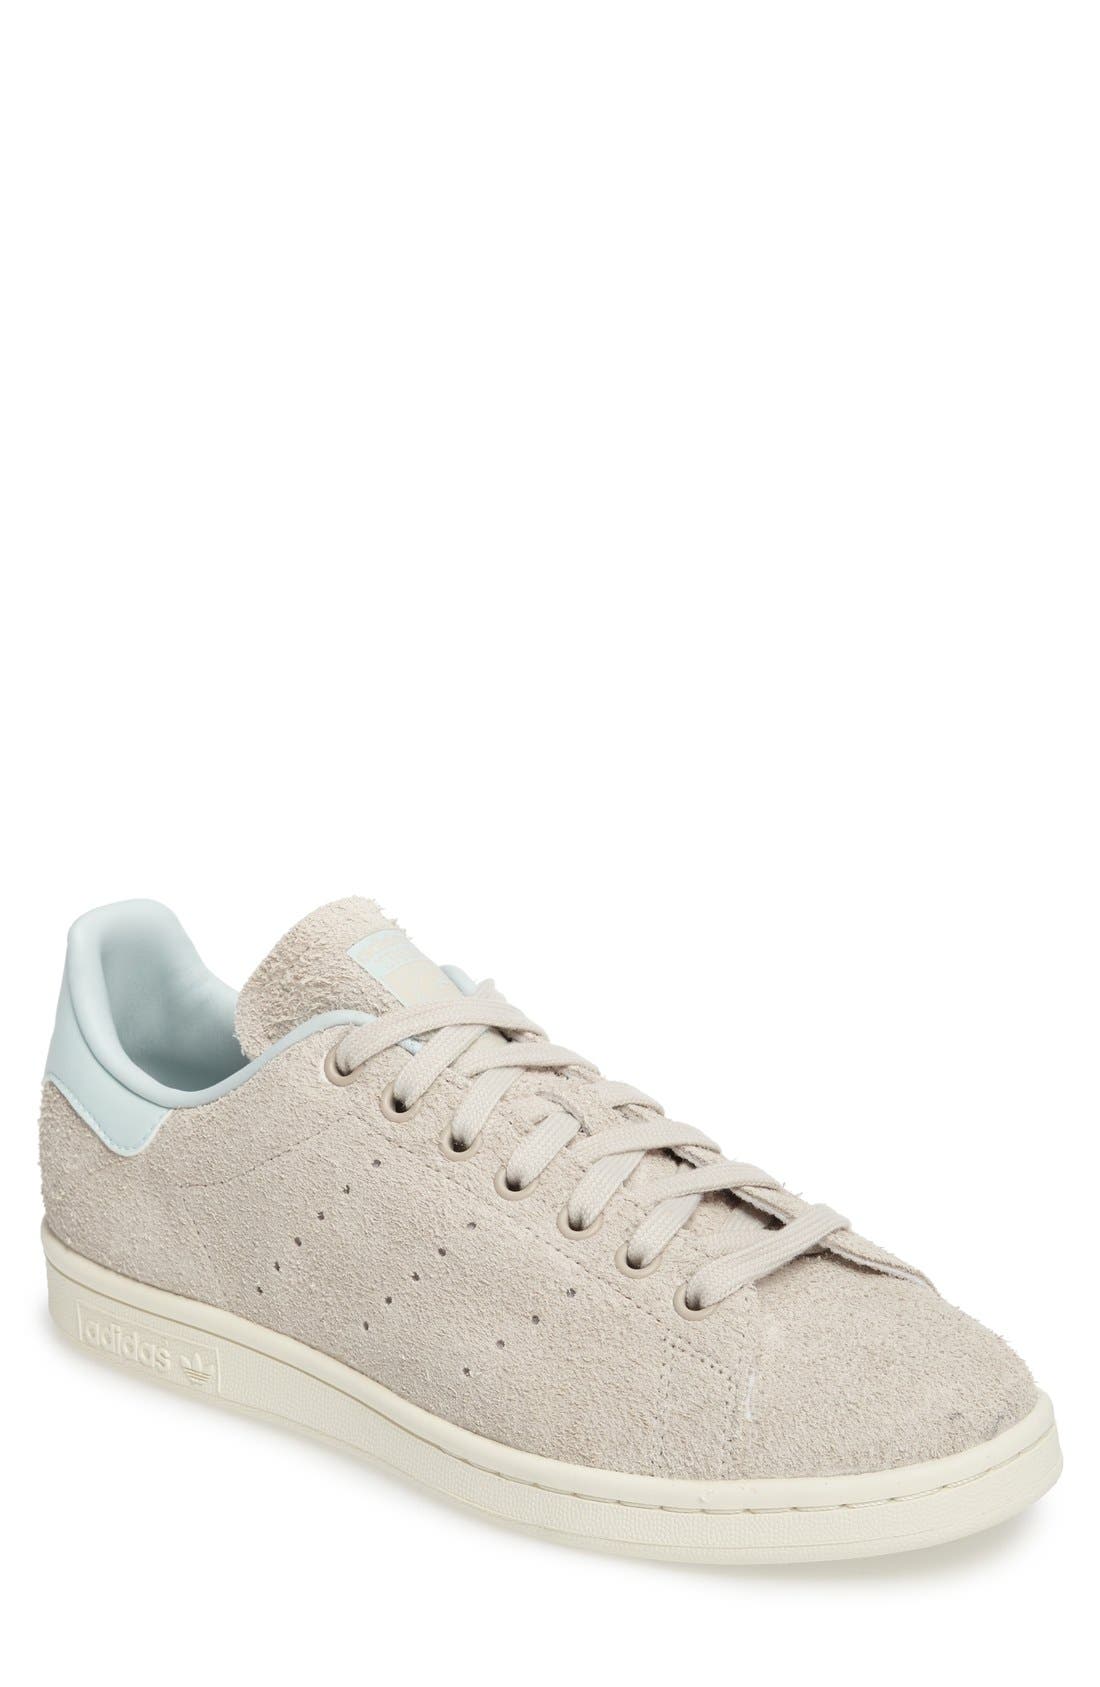 suede stan smith womens